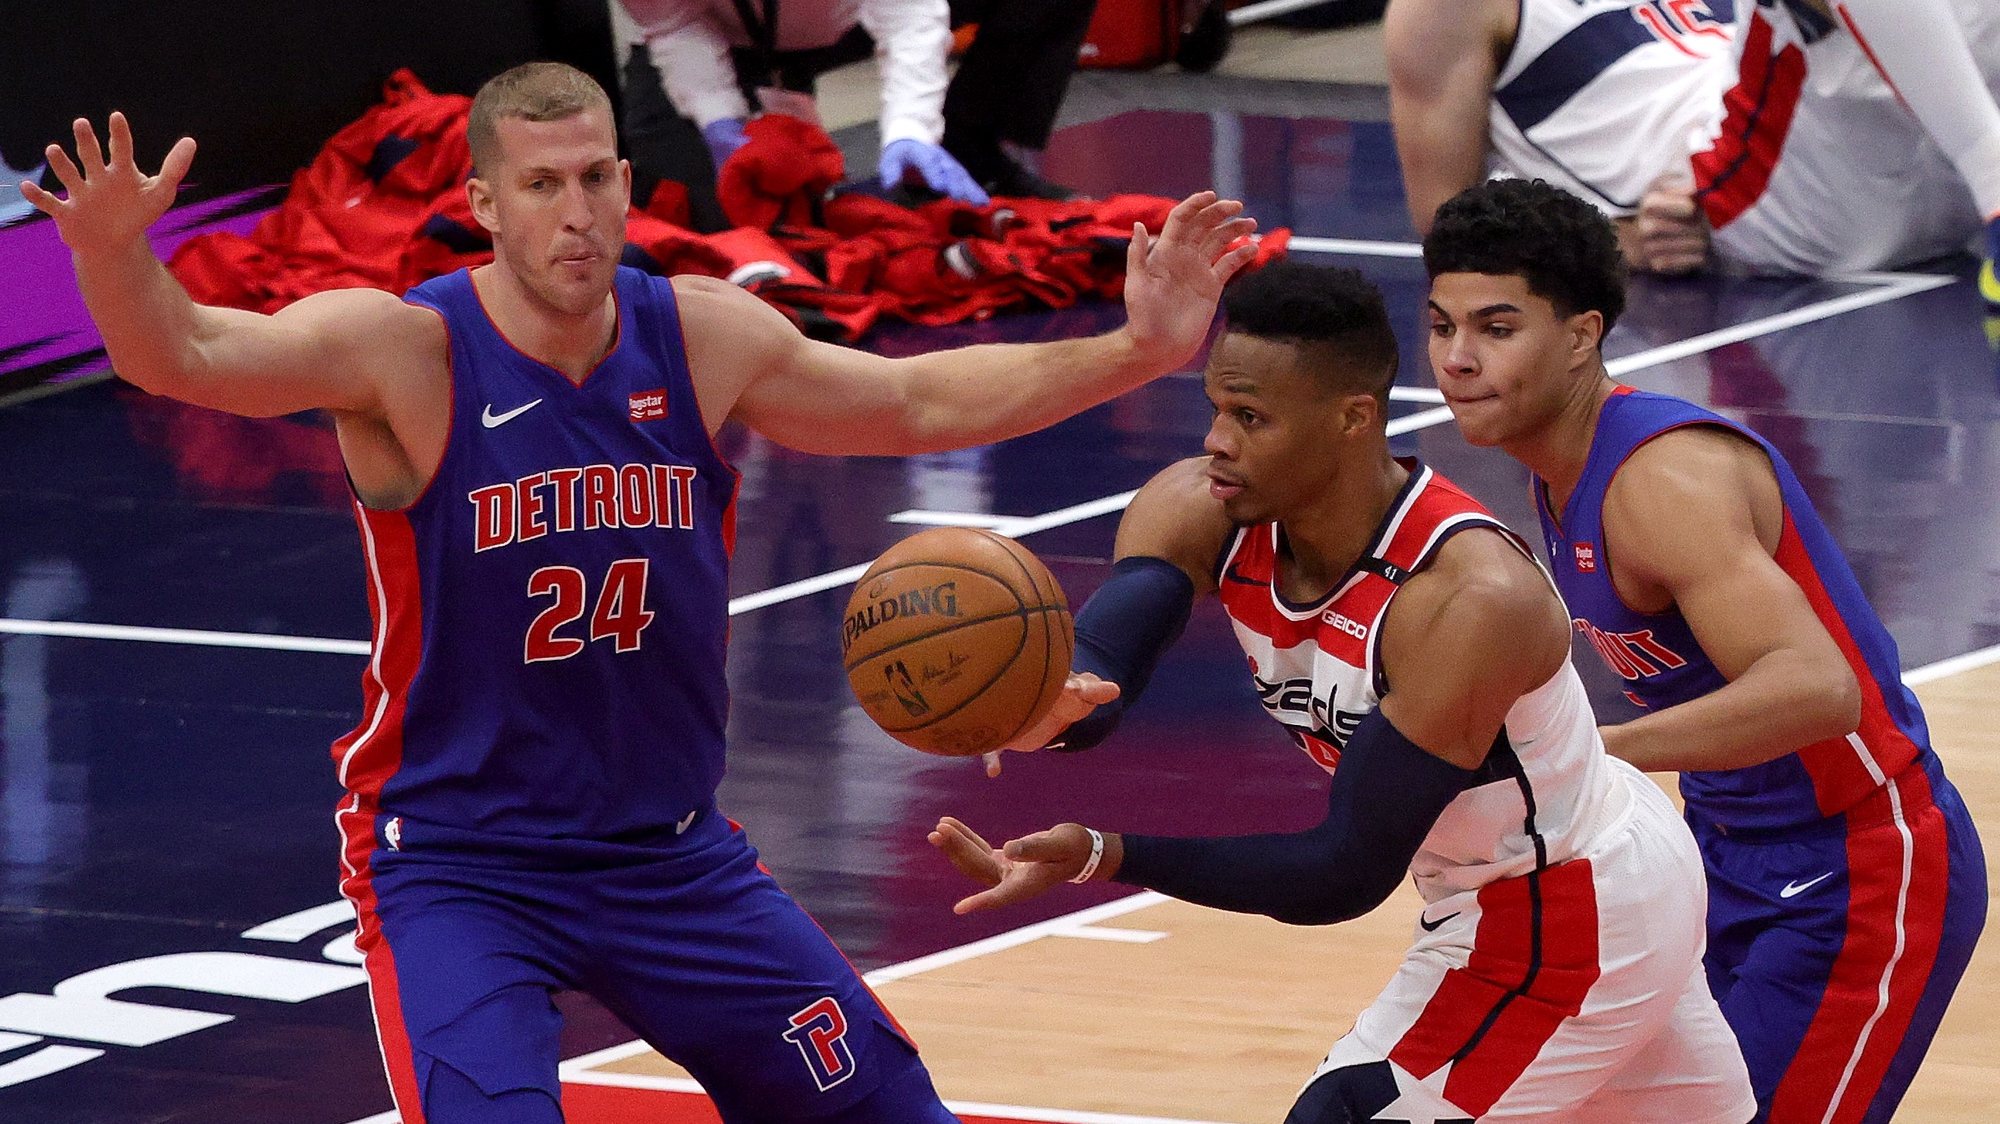 epa08894975 Russell Westbrook of the Washington Wizards passes the ball between Mason Plumlee and Killian Hayes of the Detroit Pistons in the first half during a preseason game at Capital One Arena in Washington, DC, USA, 19 Decemberr 2020.  EPA/Rob Carr / POOL  SHUTTERSTOCK OUT